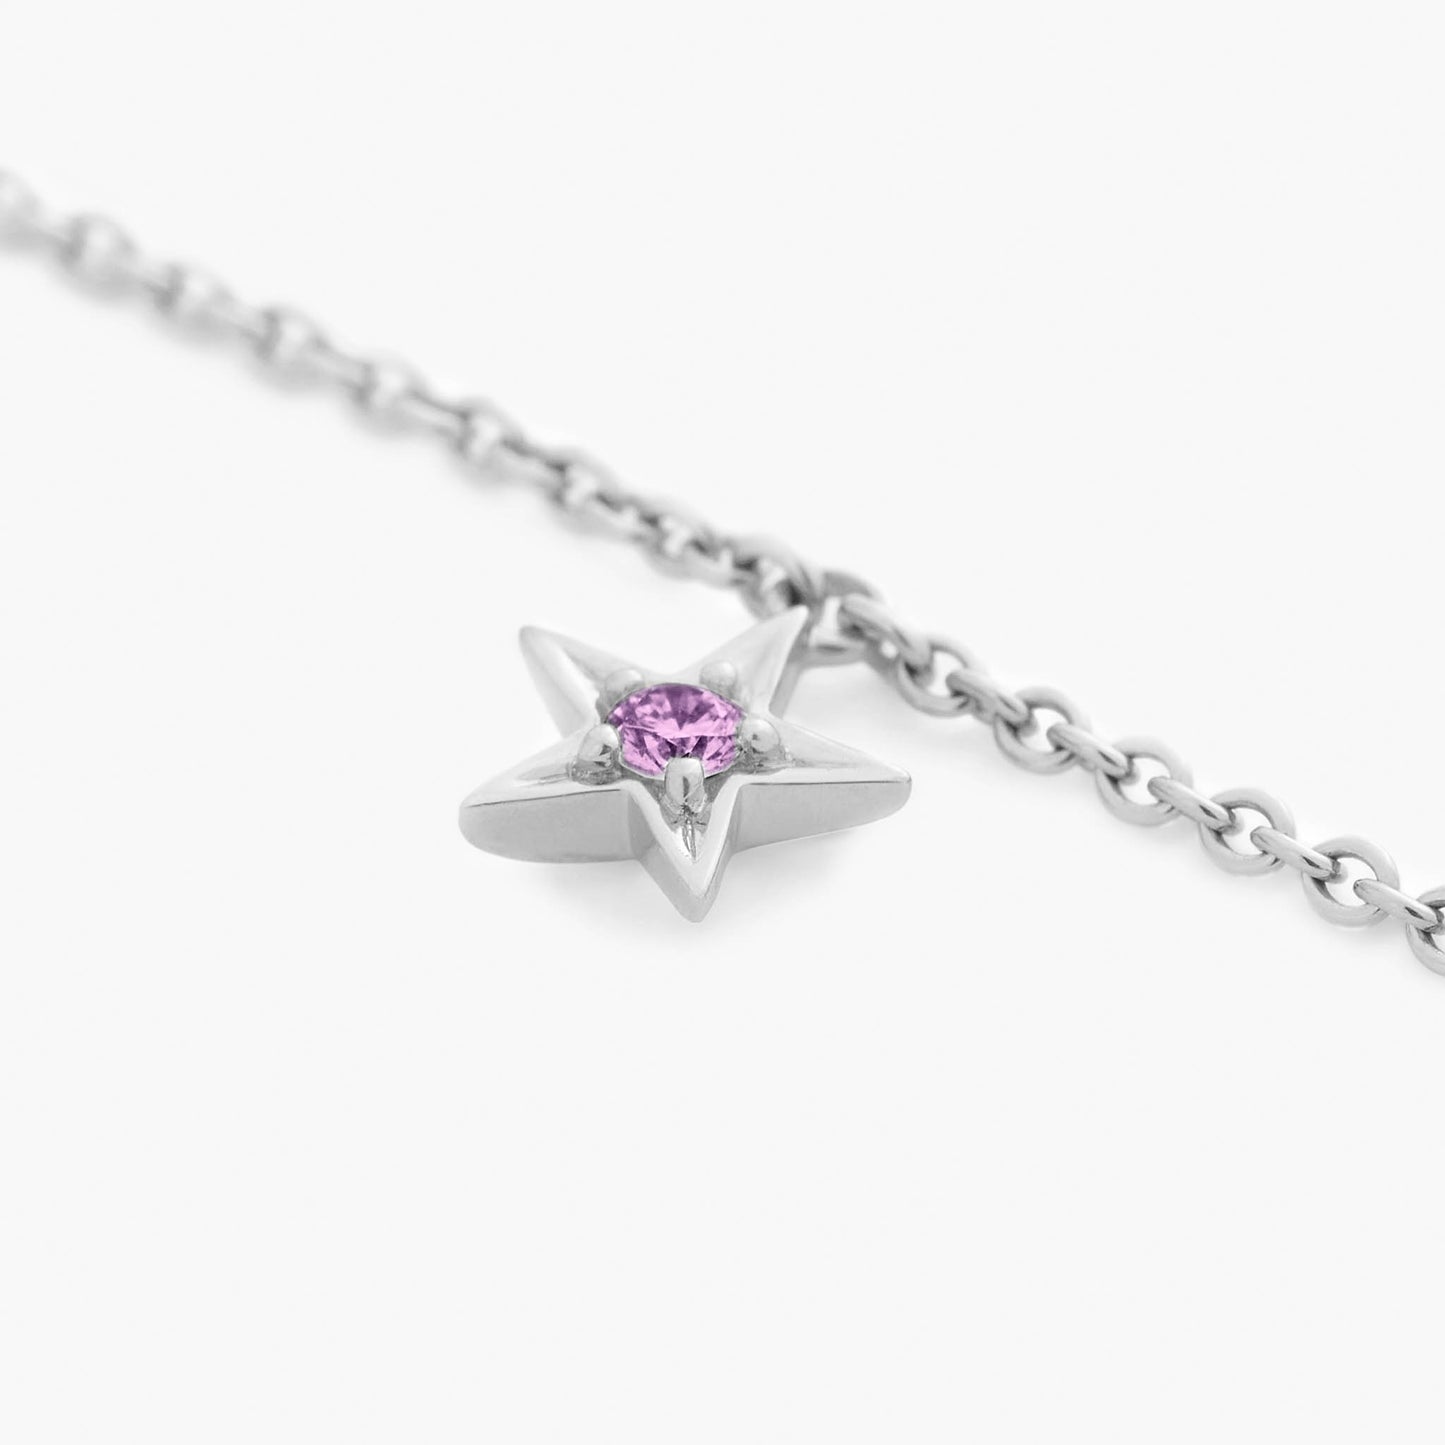 Guiding Star 18ct White Gold & Pink Sapphire Necklace, 40cm